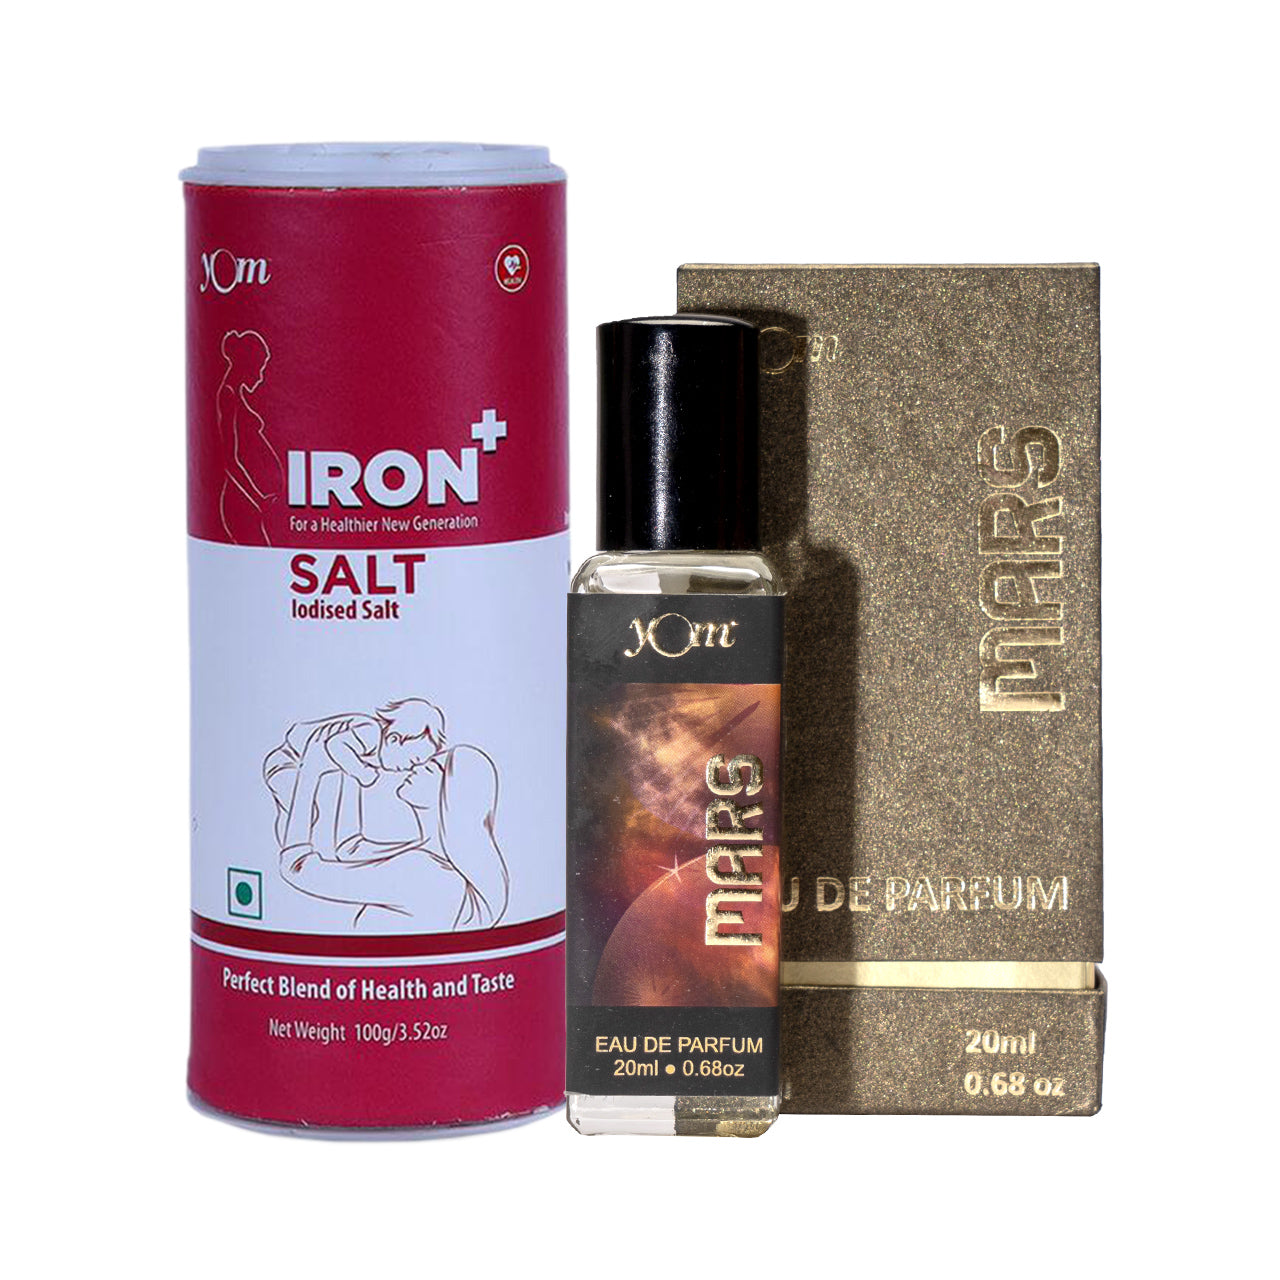 YOM PERFUME Mars for Unisex + YOM Iron Plus Fortified Salt Combo Pack - 2 Nos